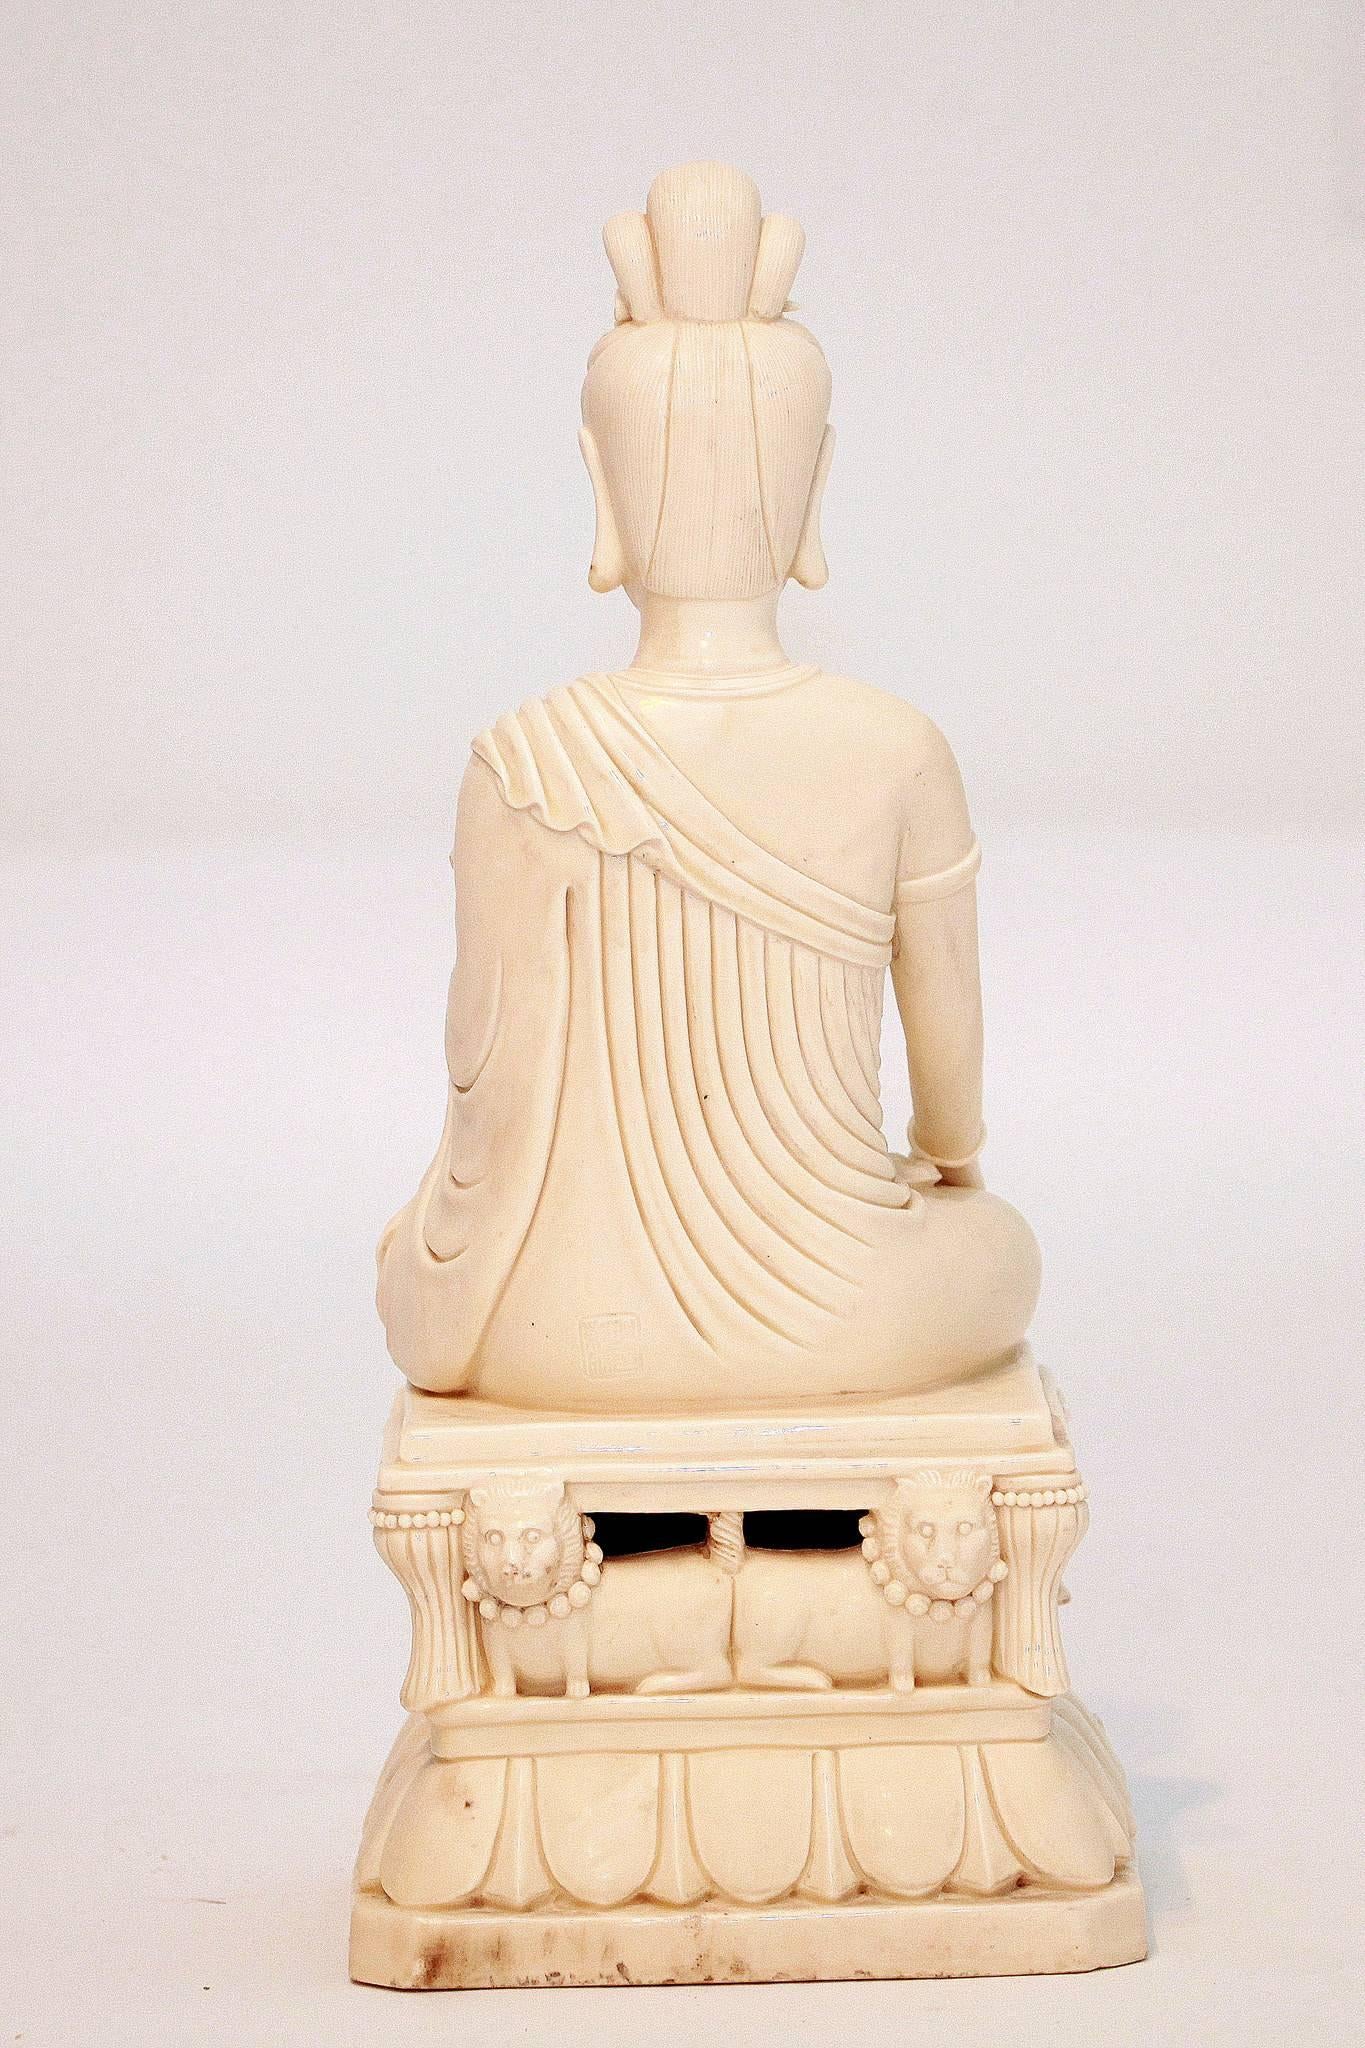 An early 20th century signed Chinese Blanc de Chine Guanyin (Quan Yin) styled in a ruched robe, Buddha crown, holding a cloud septor and seated on a pedestal with four lion dogs.